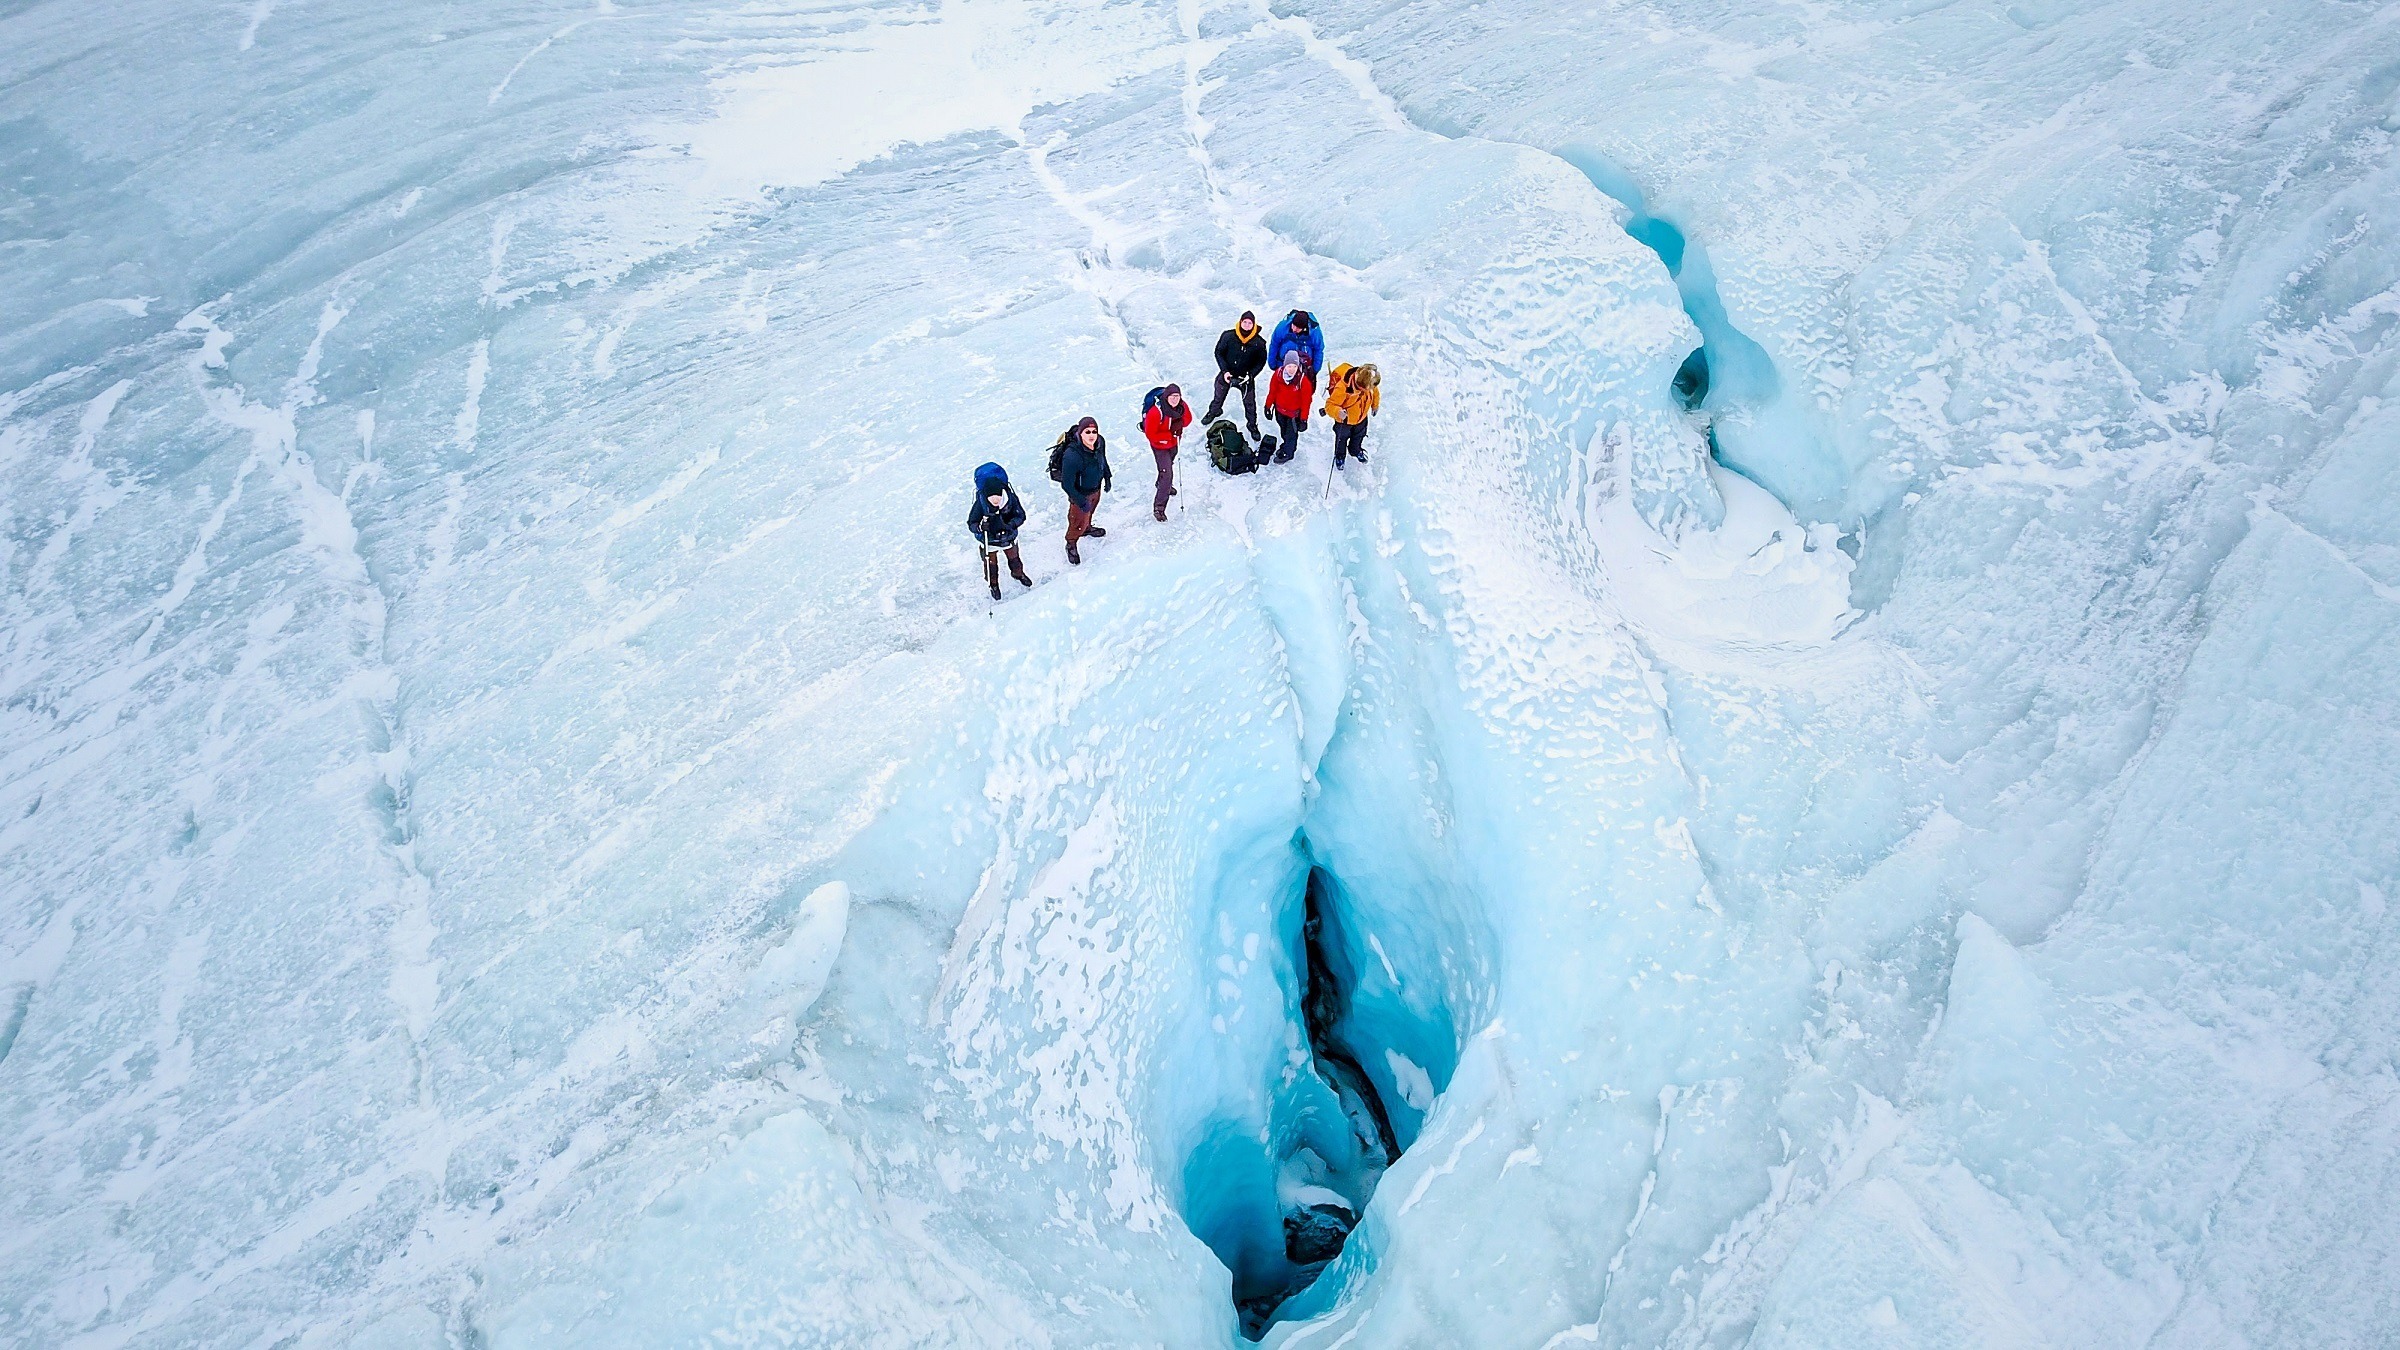 Drone photograph of people near a moulin on the Greenland Ice Sheet near Kangerlussuaq